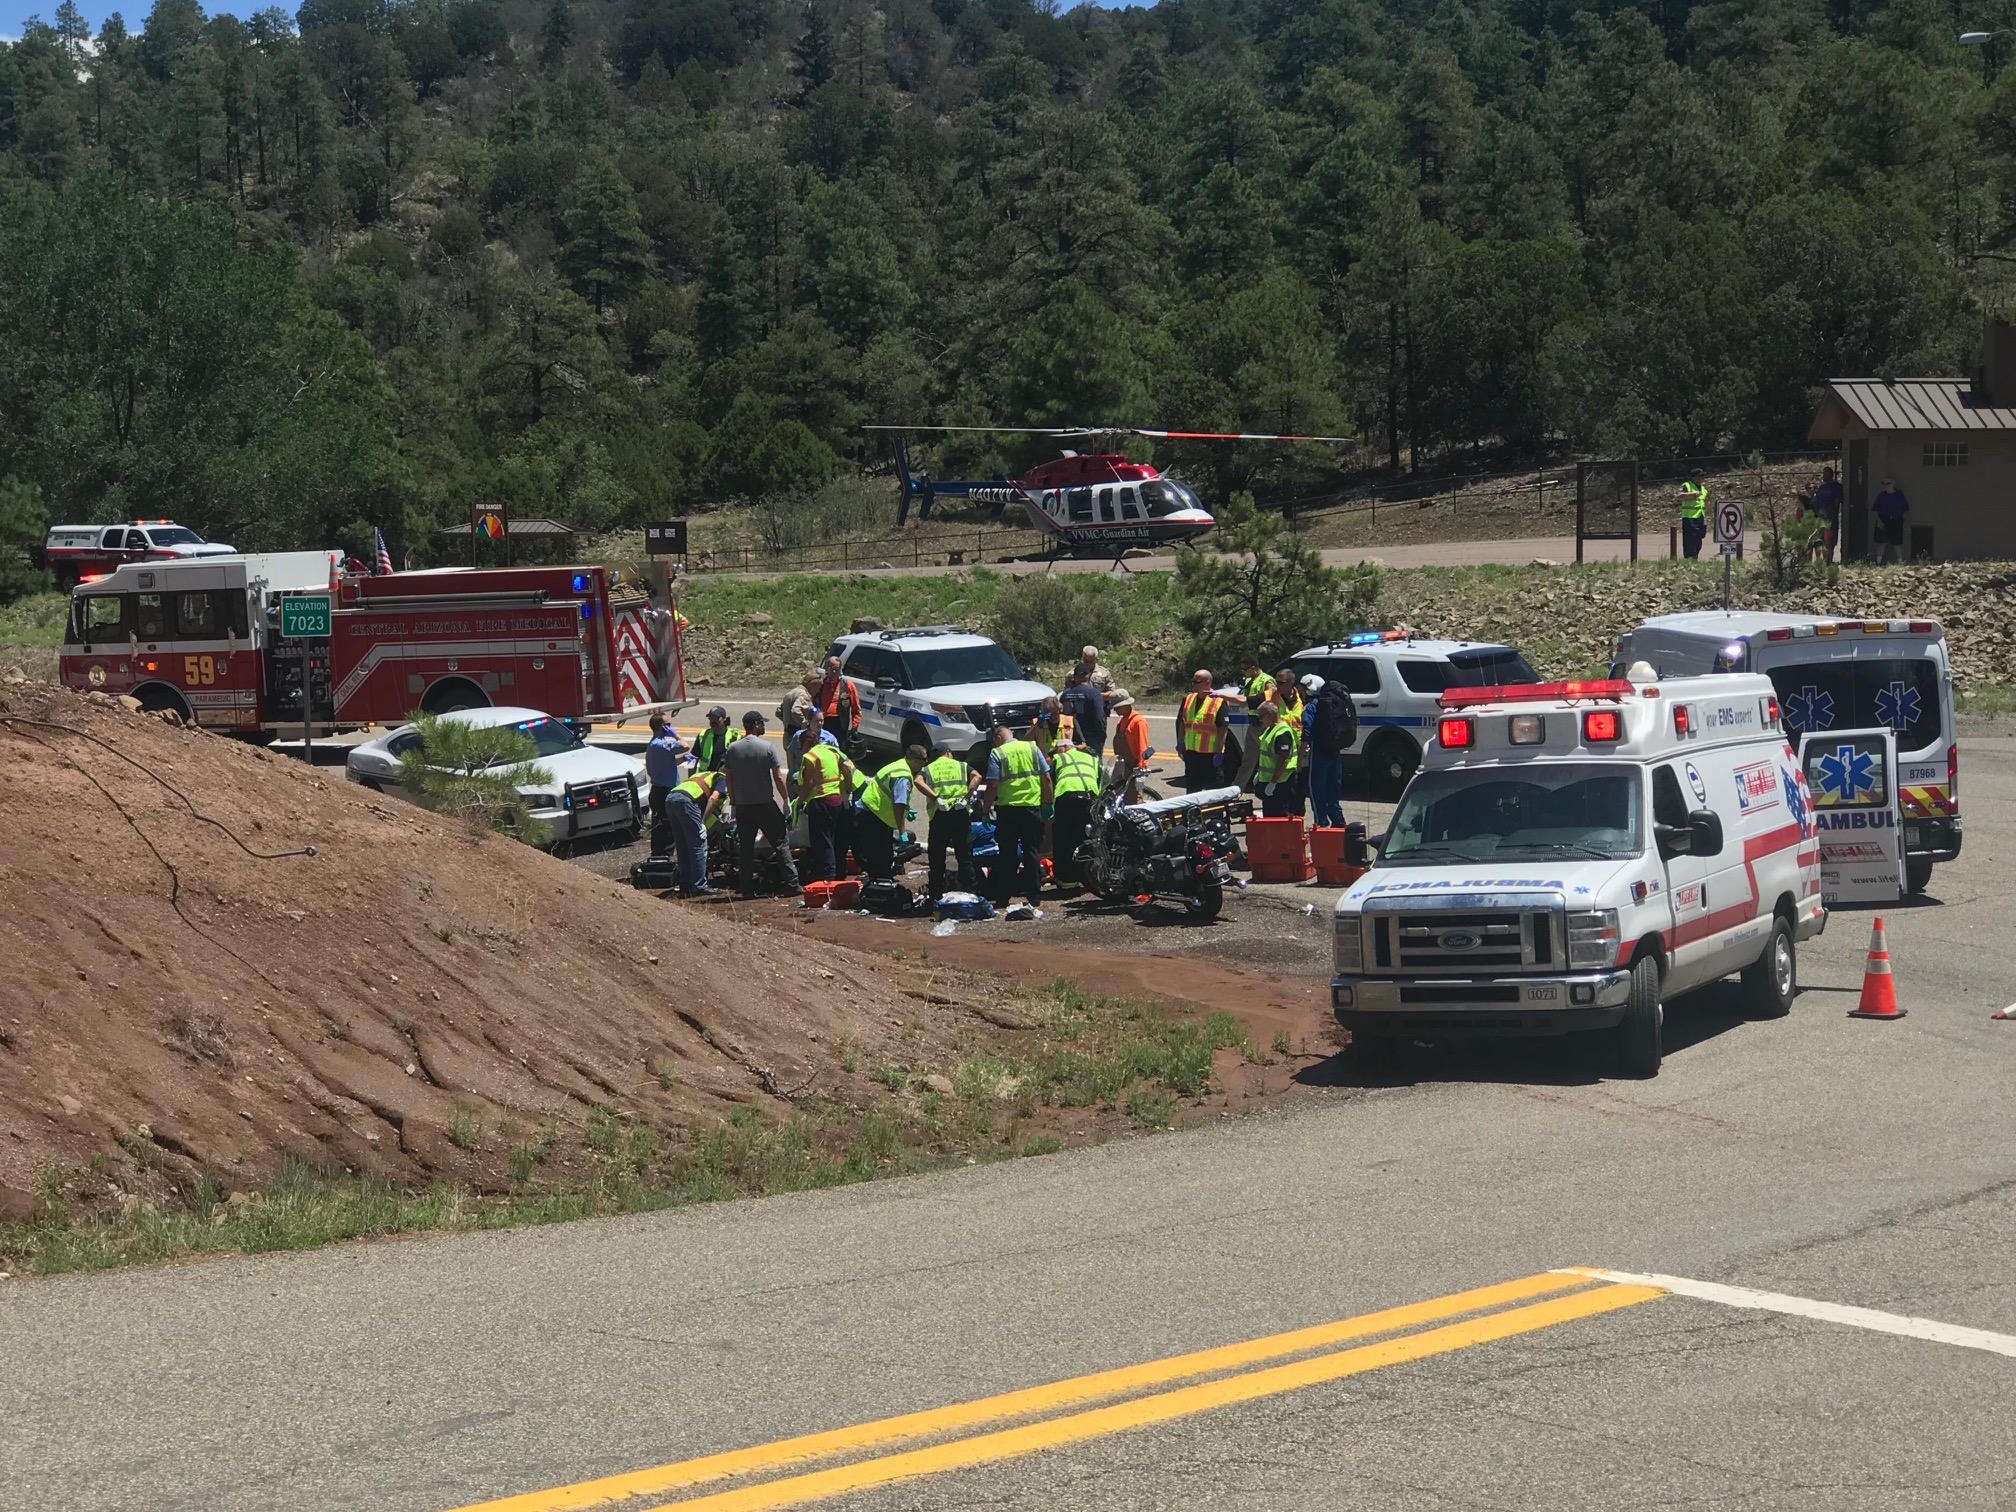 Two injured in motorcycle accident on Mingus Mountain | The Verde Independent | Cottonwood, AZ